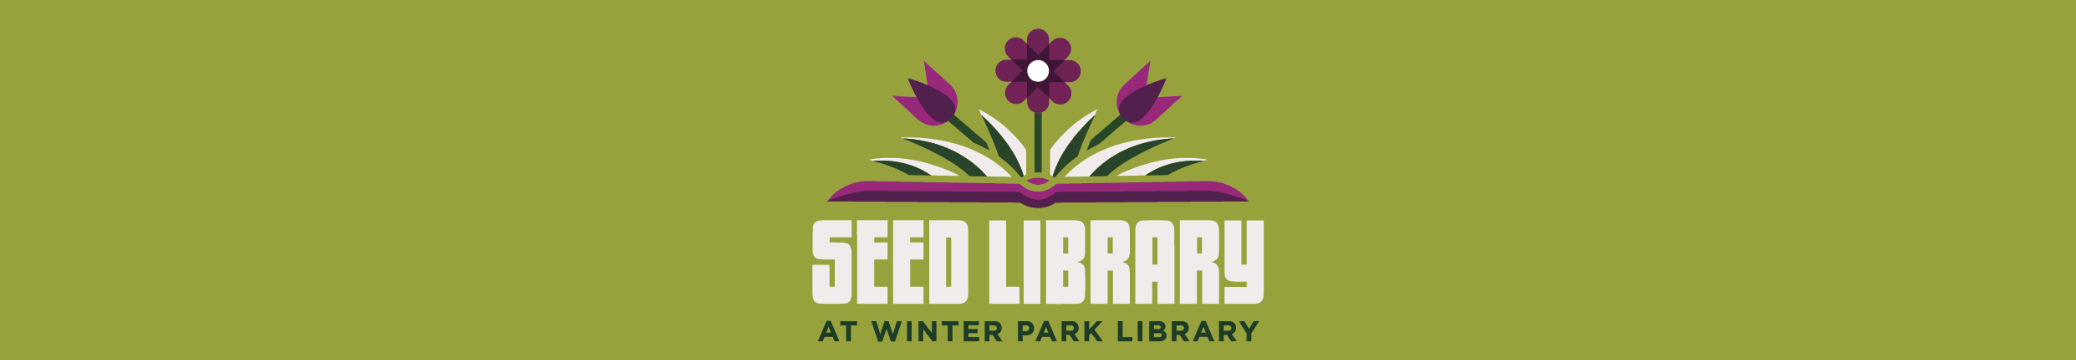 Seed Library at Winter Park Library banner with graphic of flowers growing from a book